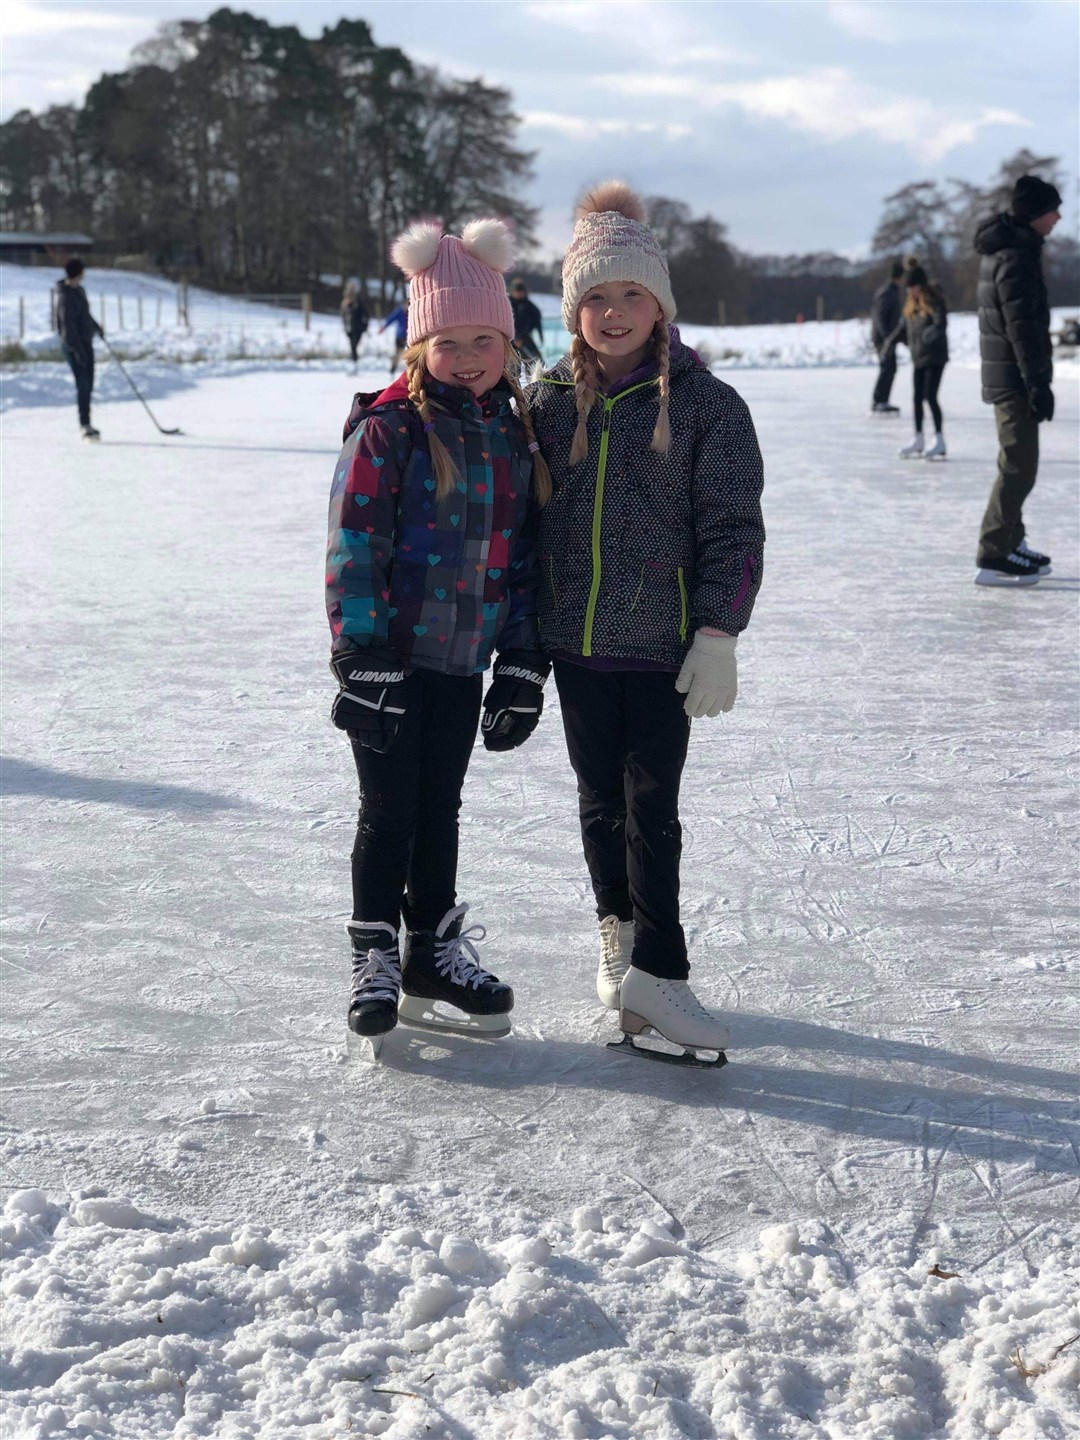 Aviemore sisters Amy and Ellie Macleod enjoying the natural ice at a rink created by Rothiemurchus and Aviemore Tennis Club during this year’s freezing spell.